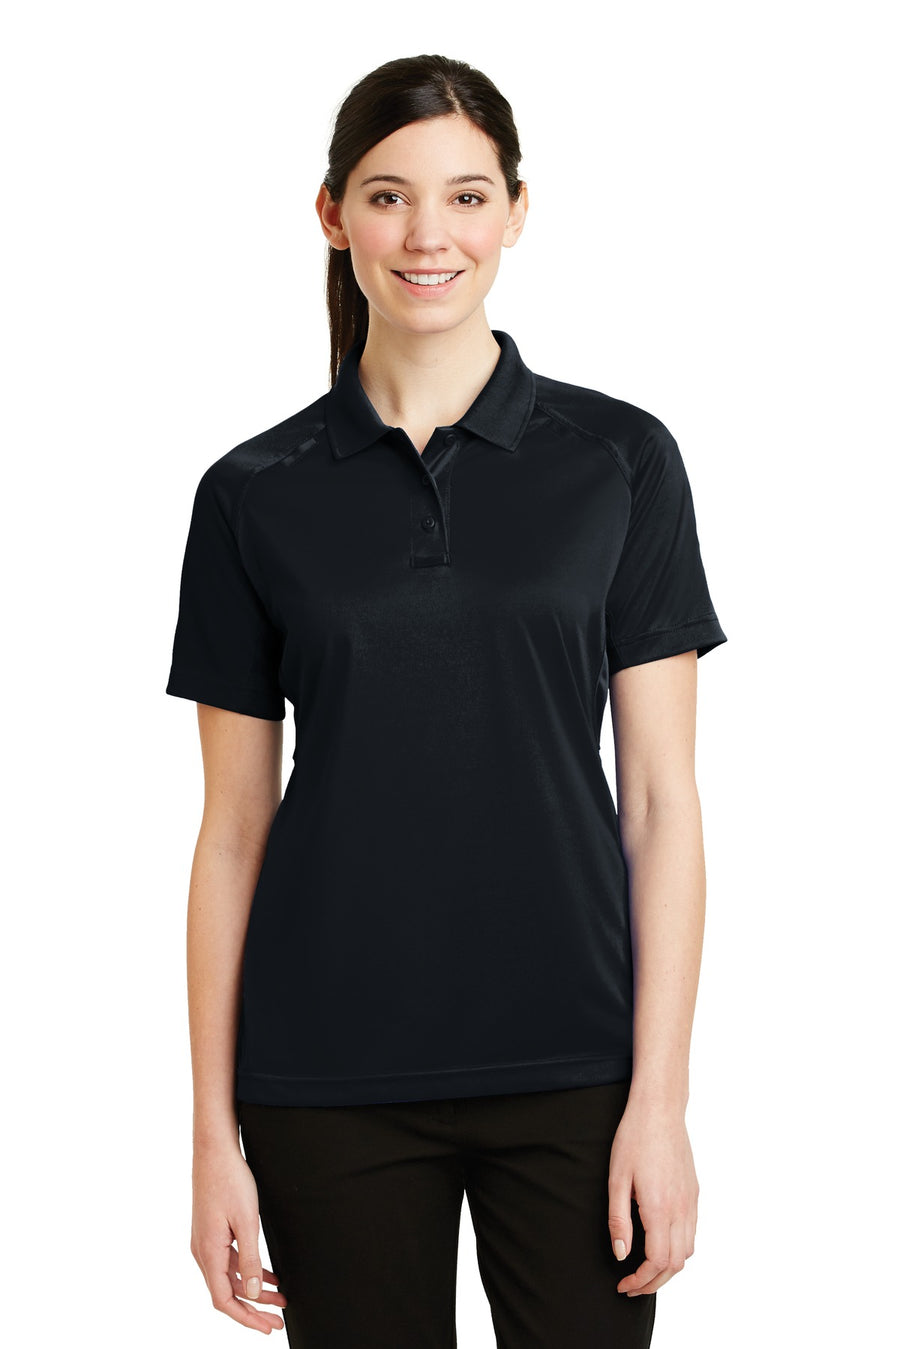 CornerStone - Select Snag-Proof Tactical Polo.